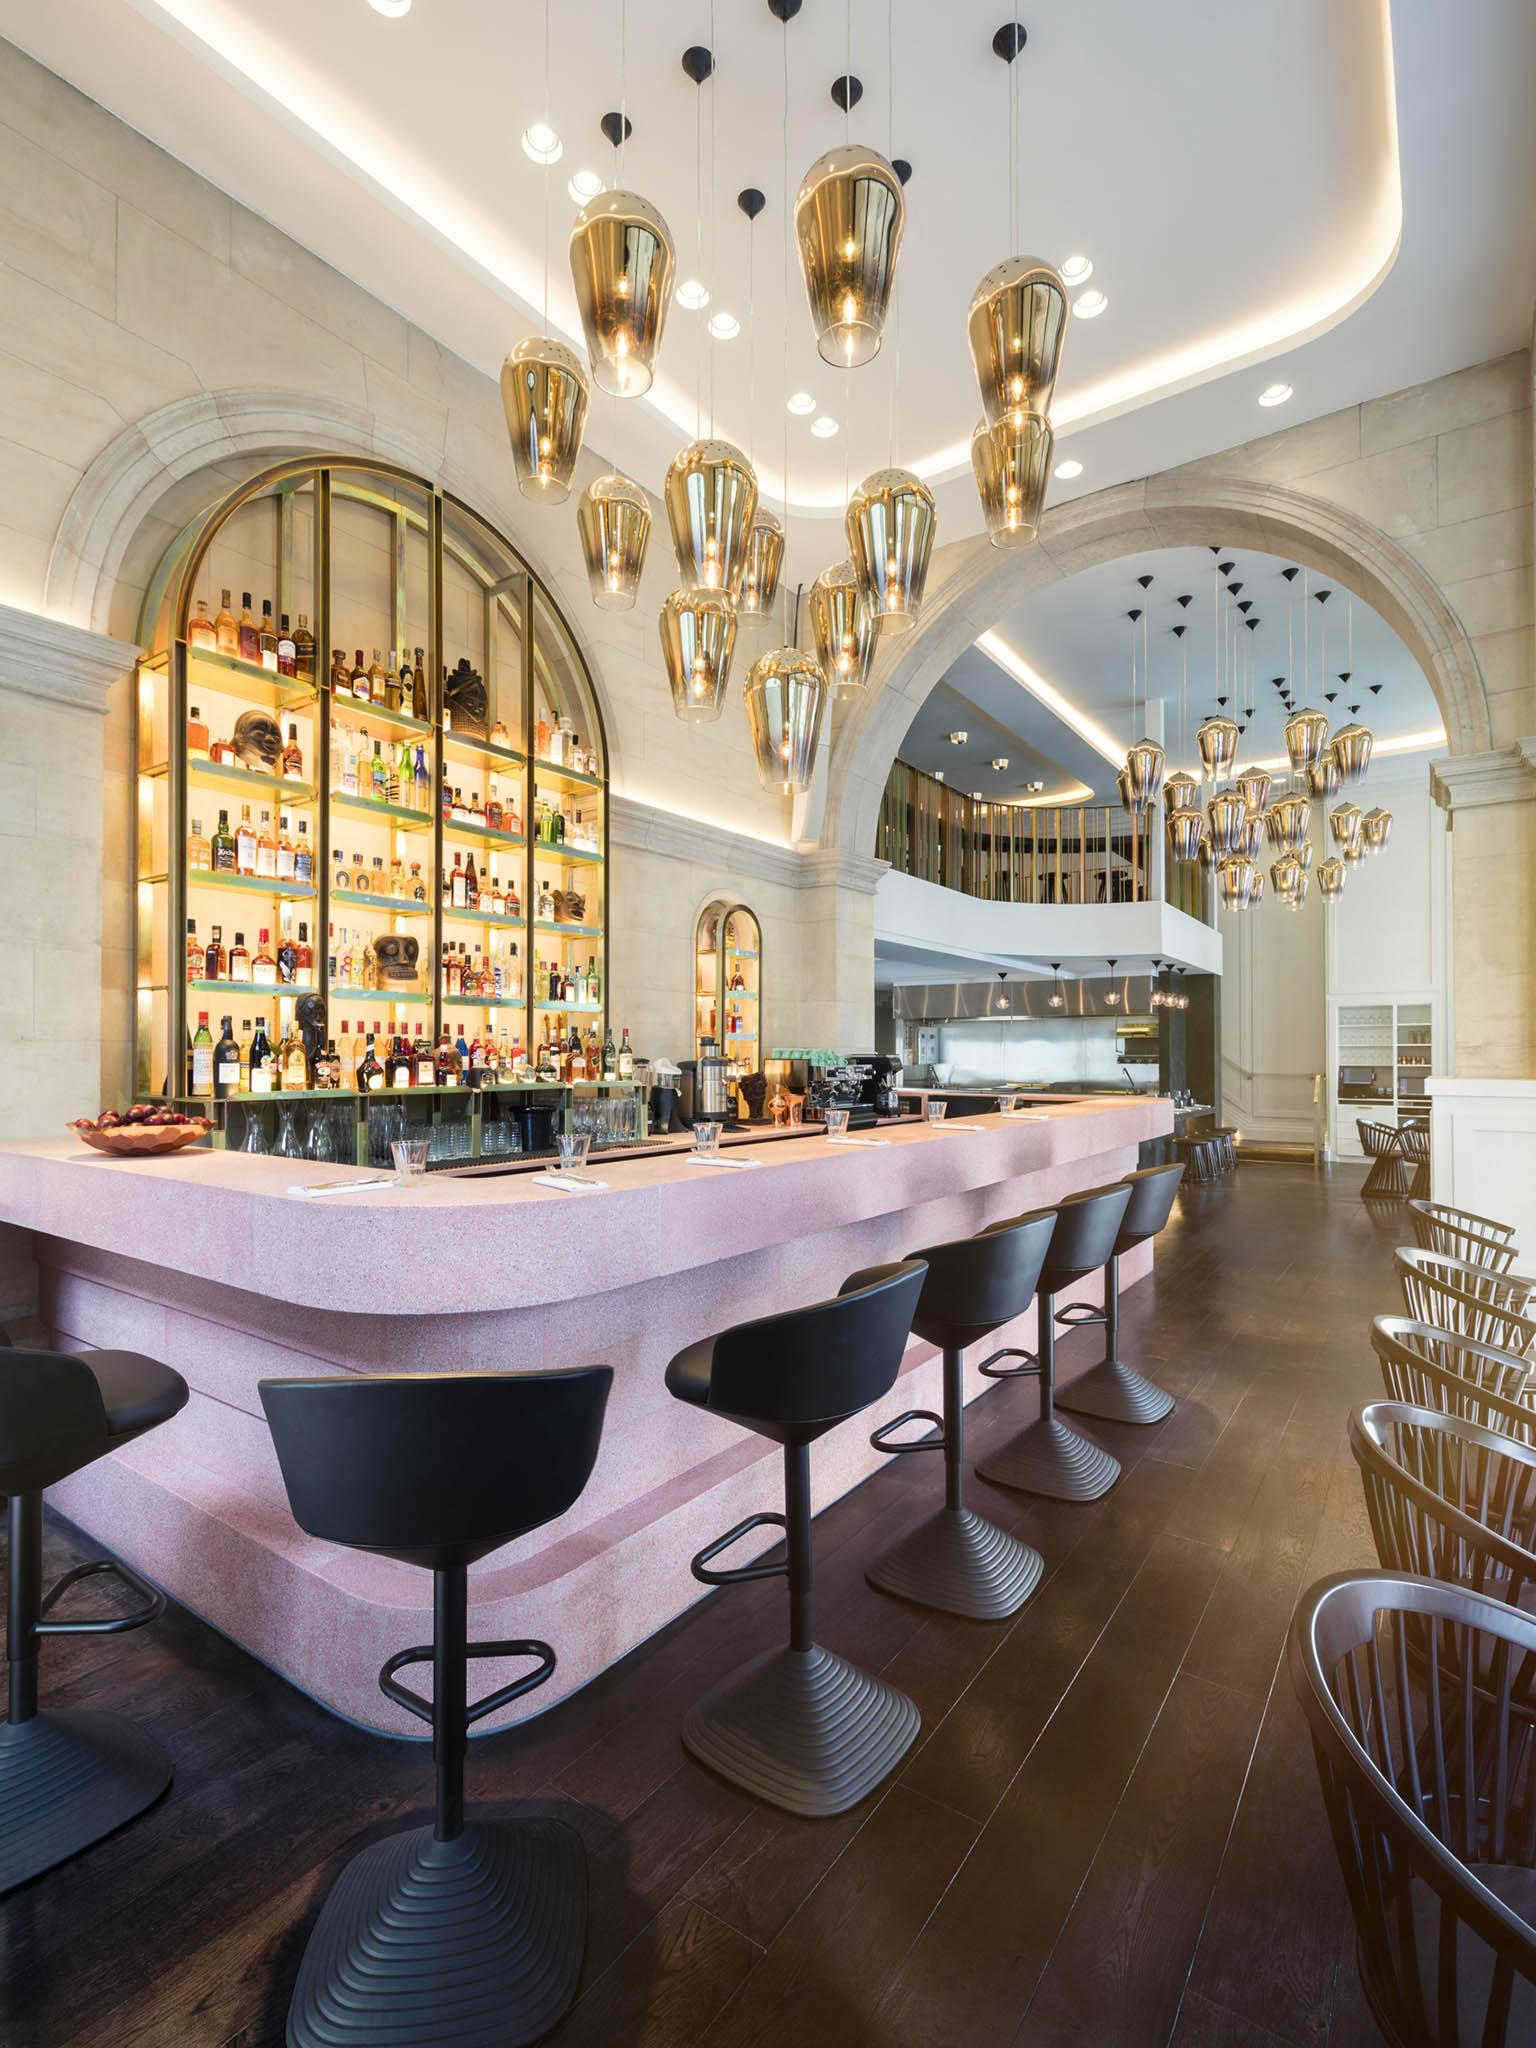 Tom Dixon's pink concrete bar and hanging pendant lights in the entrance